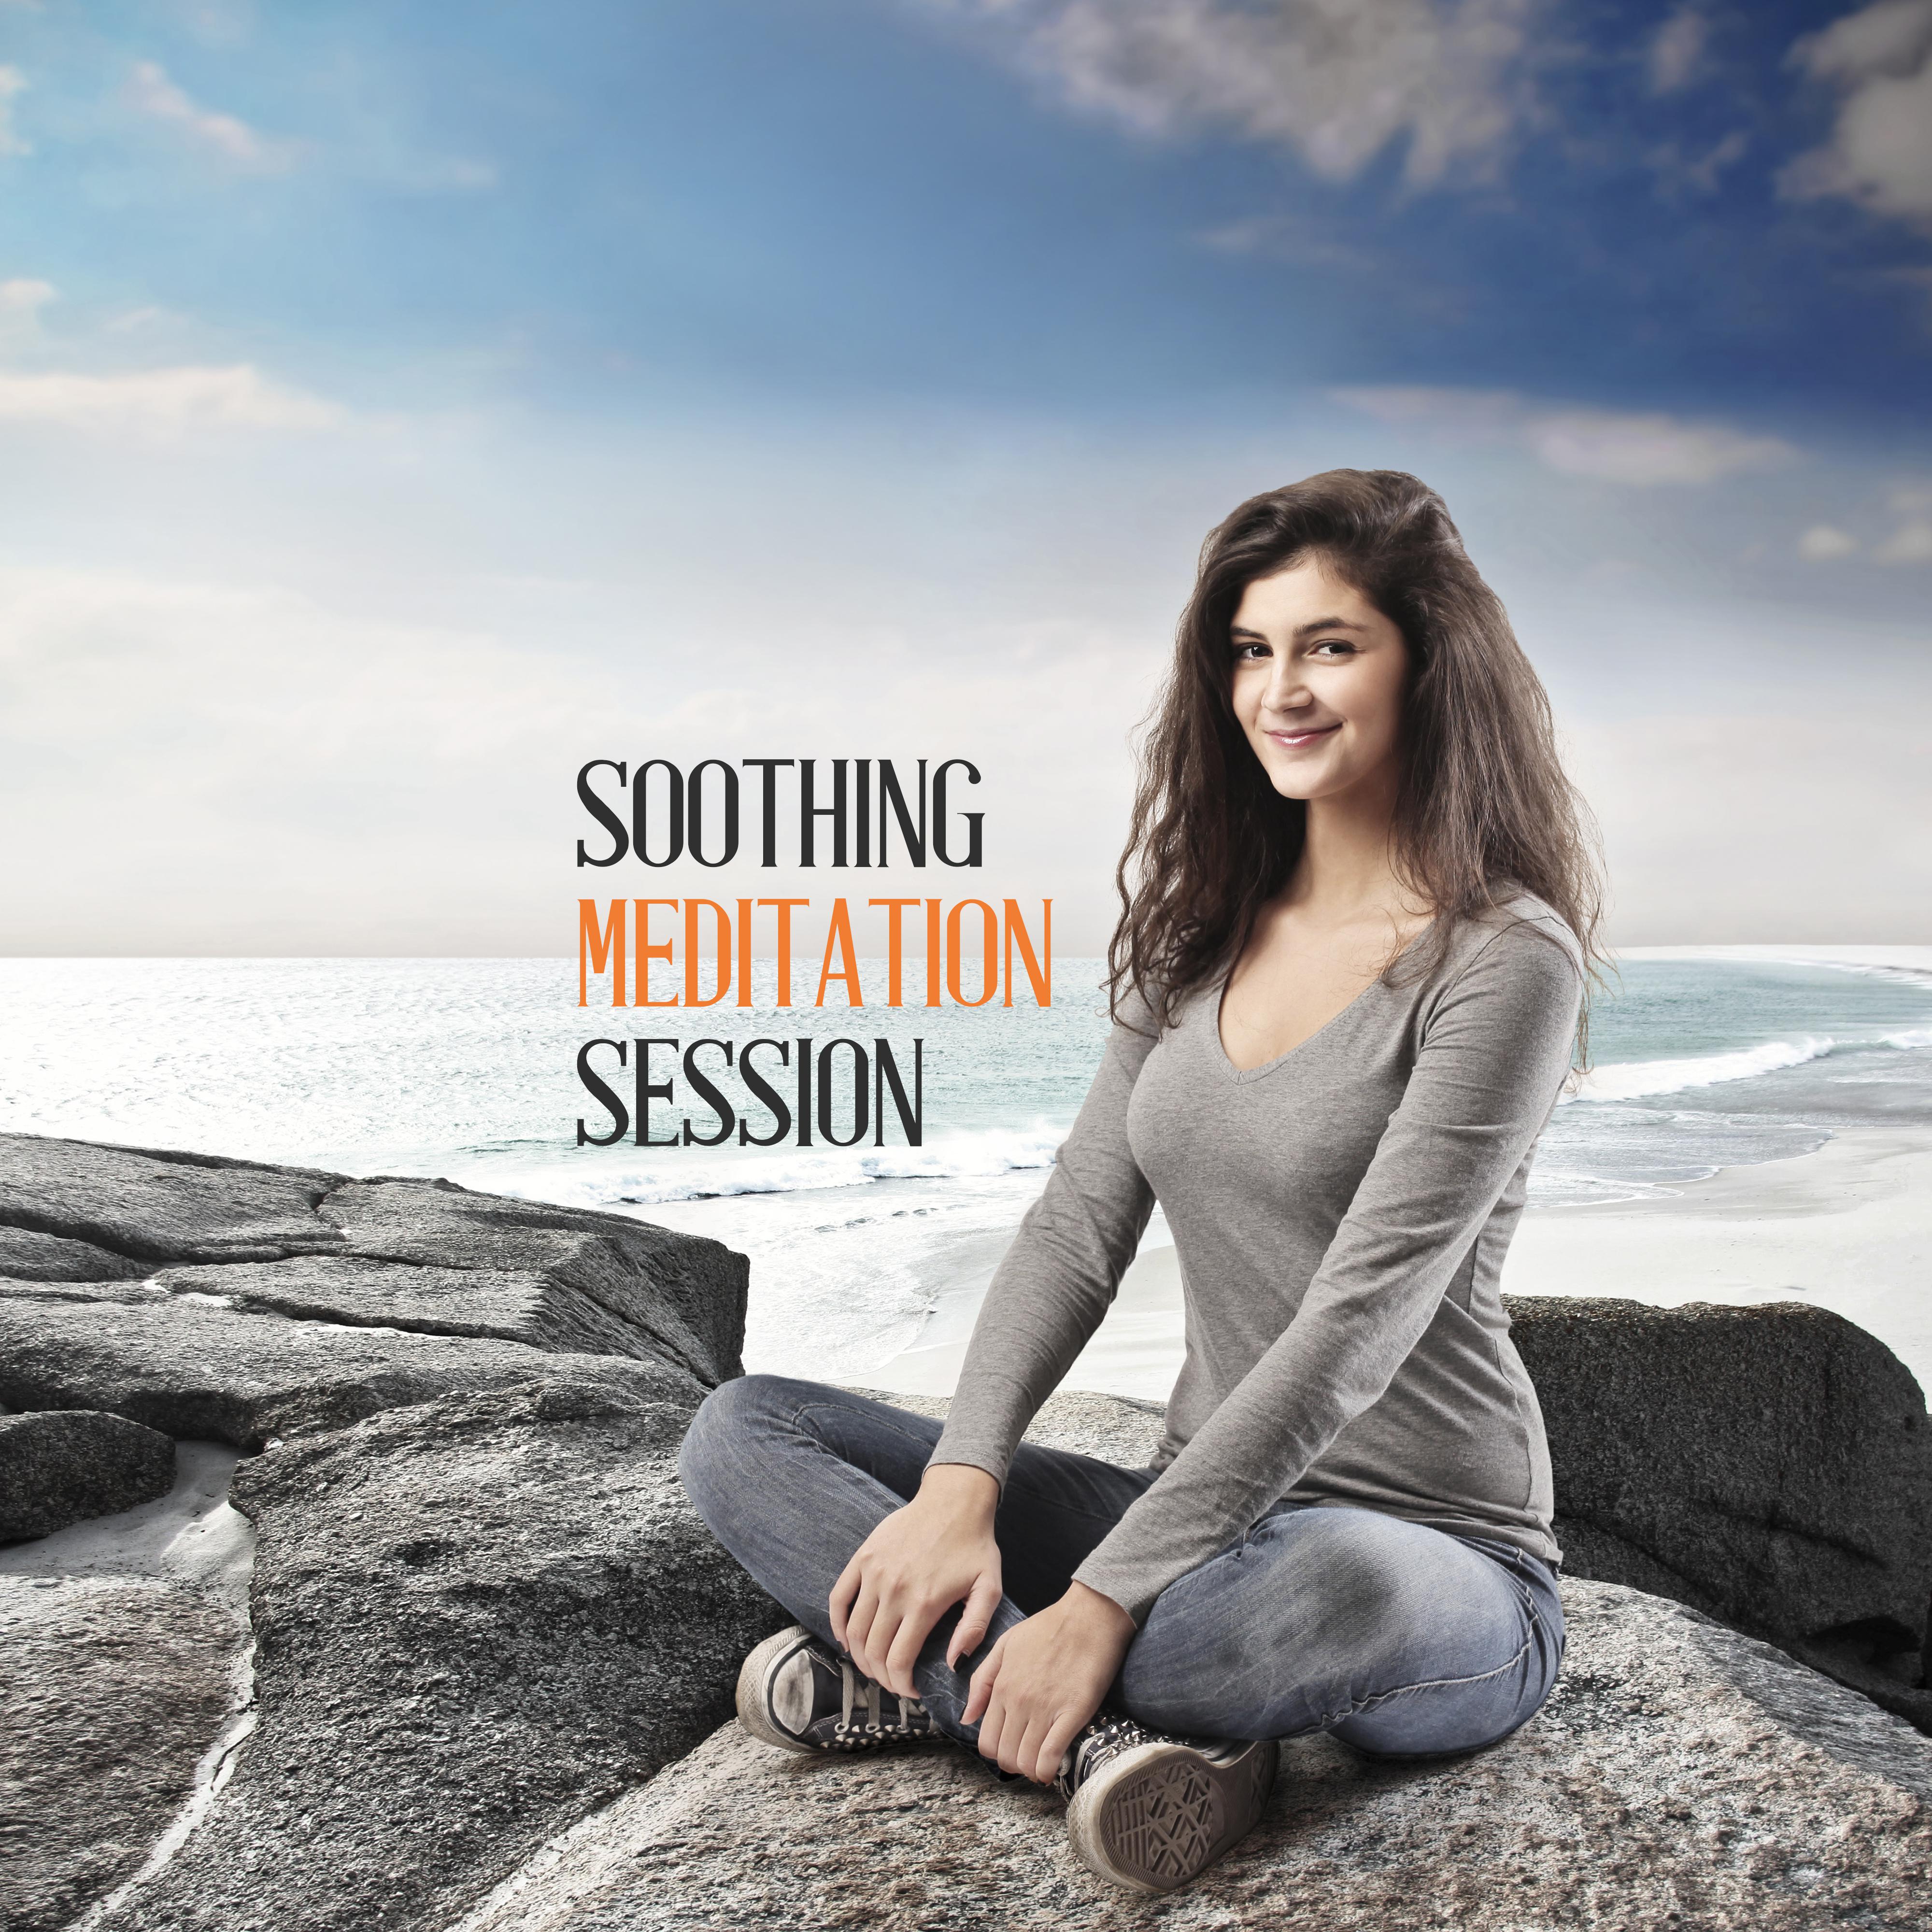 Soothing Meditation Session: Healing Melodies for Meditation, Relief in Stress, Reduction of Tension and Anger, Relaxing Sounds, Inner Harmony and Peace